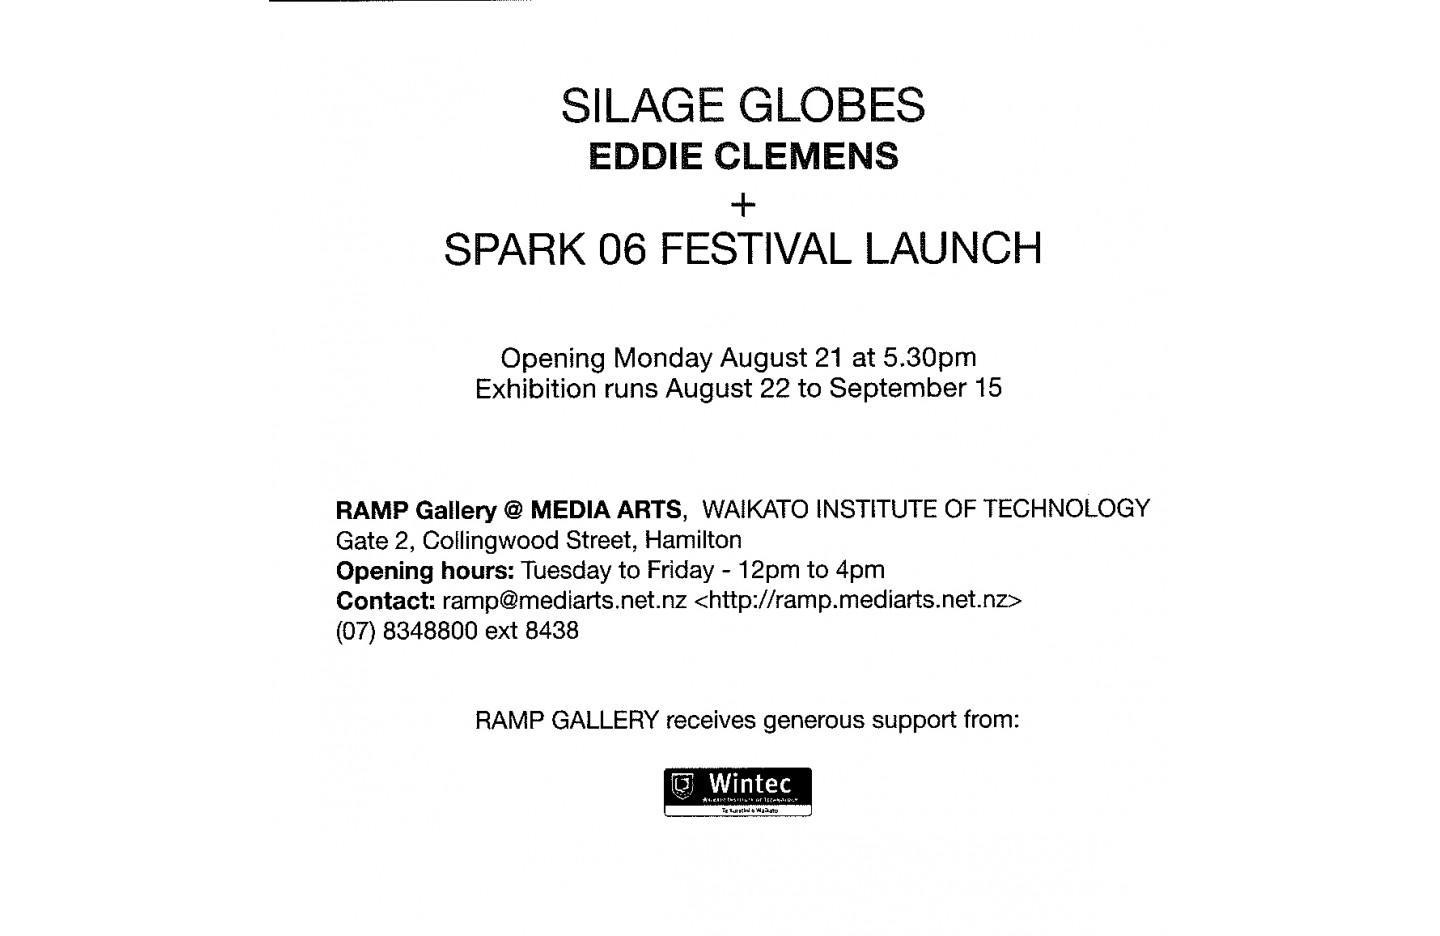 Silage Globes, Ramp Gallery (2006)